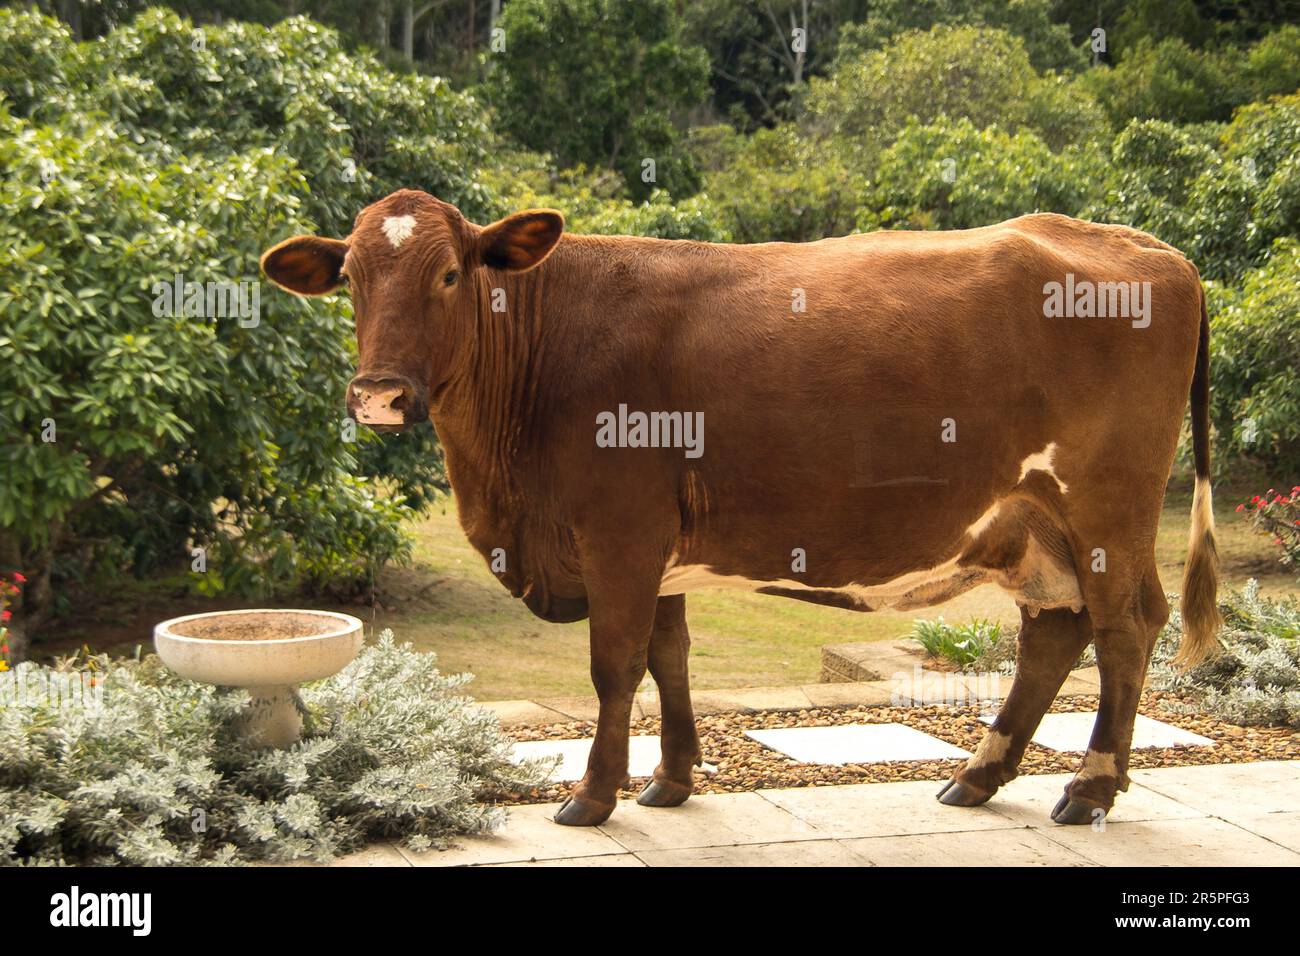 Large brown cow escaped from farm field and into private garden in Queensland, Australia. Has drunk water from bird-bath. Wrong place at wrong time. Stock Photo